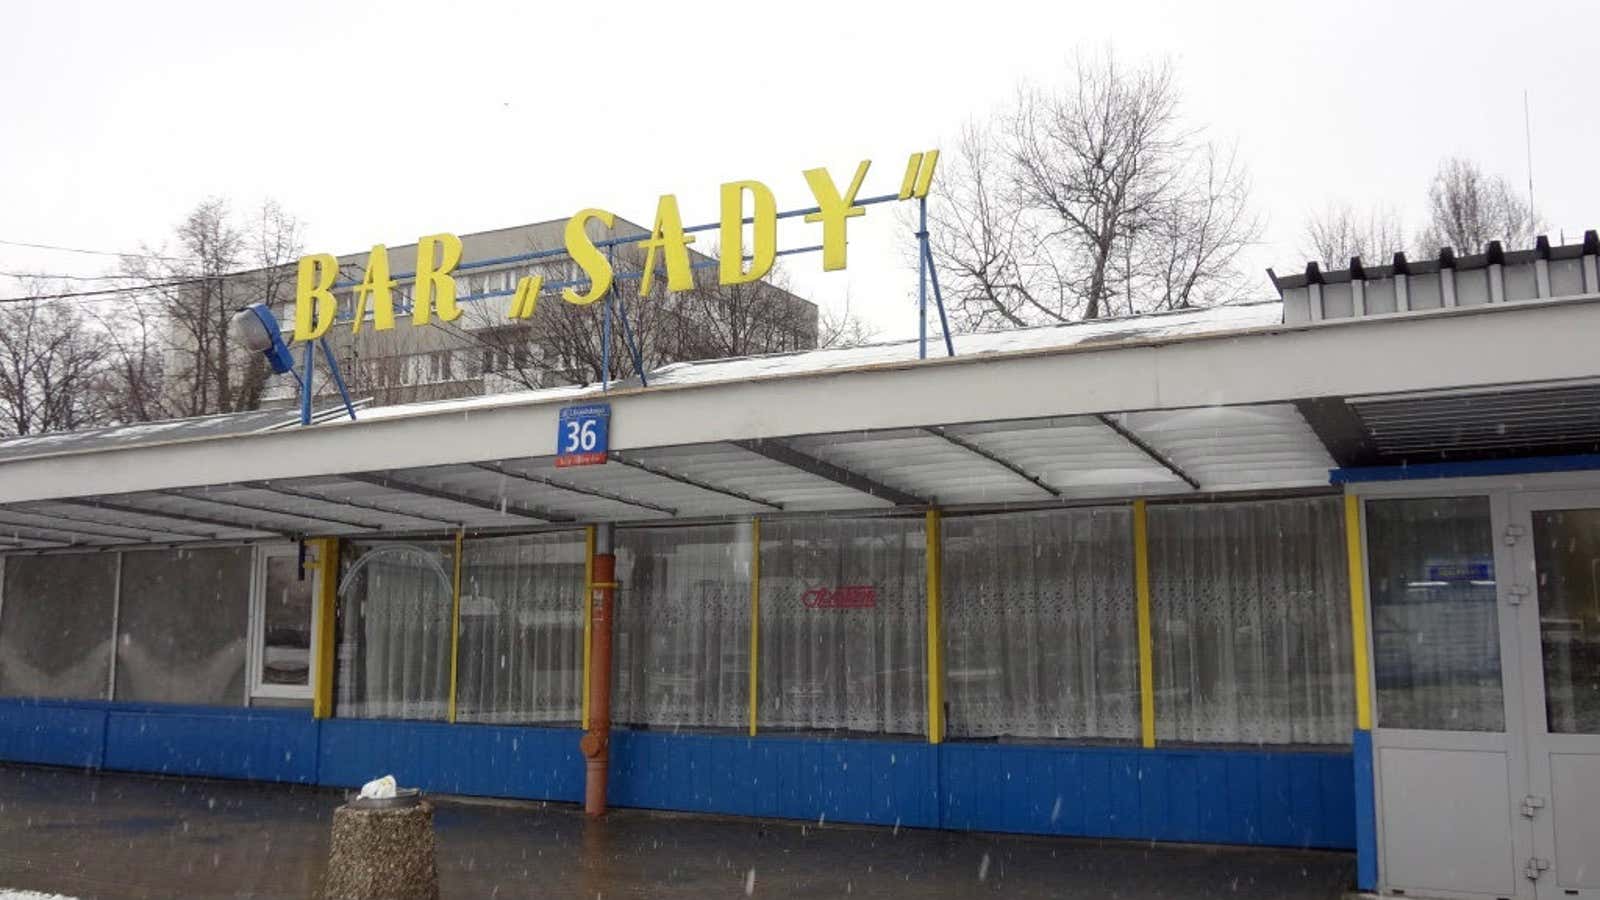 Bar Sady, a bright structure set in the gray Sady Żoliborskie housing estate, has changed little since it was built in the 1950’s